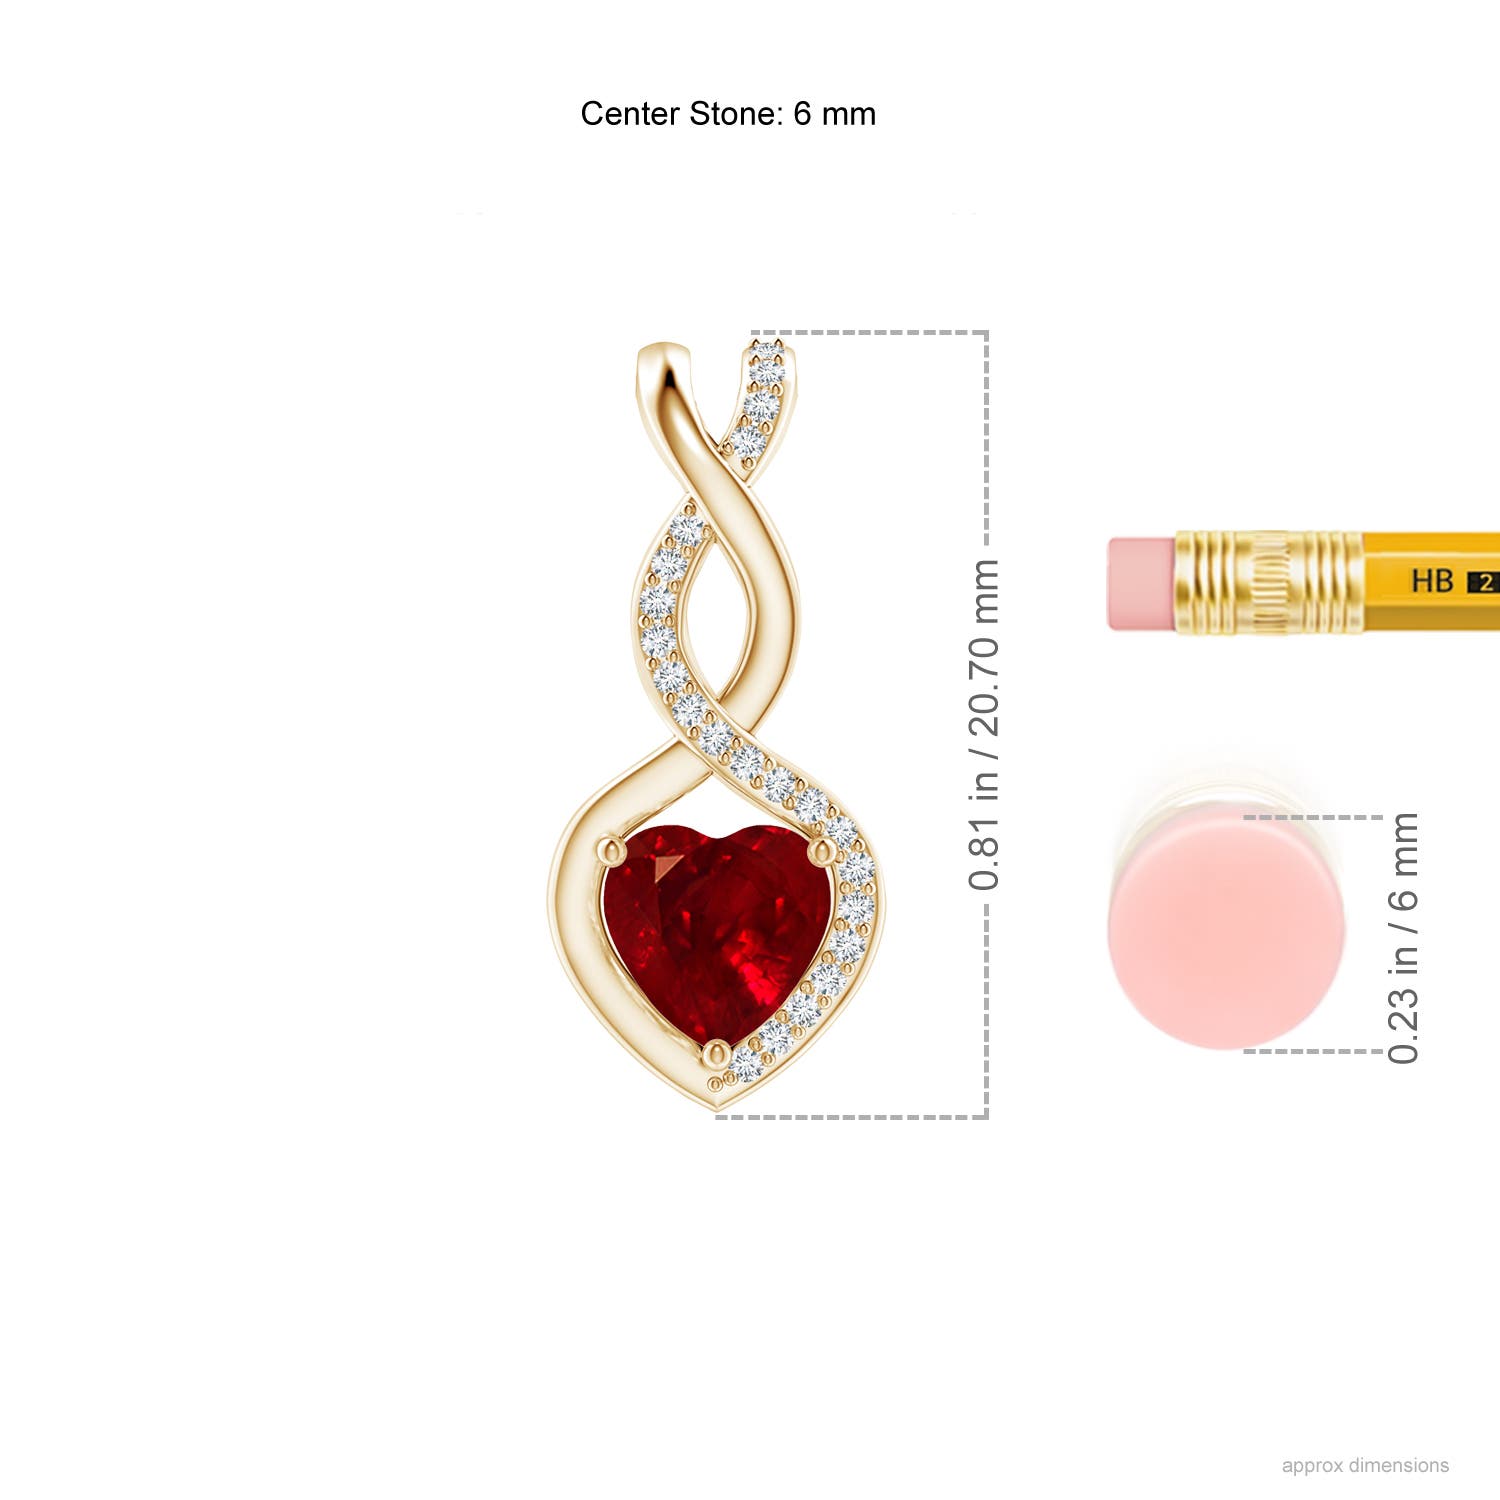 AAAA - Ruby / 0.88 CT / 14 KT Yellow Gold